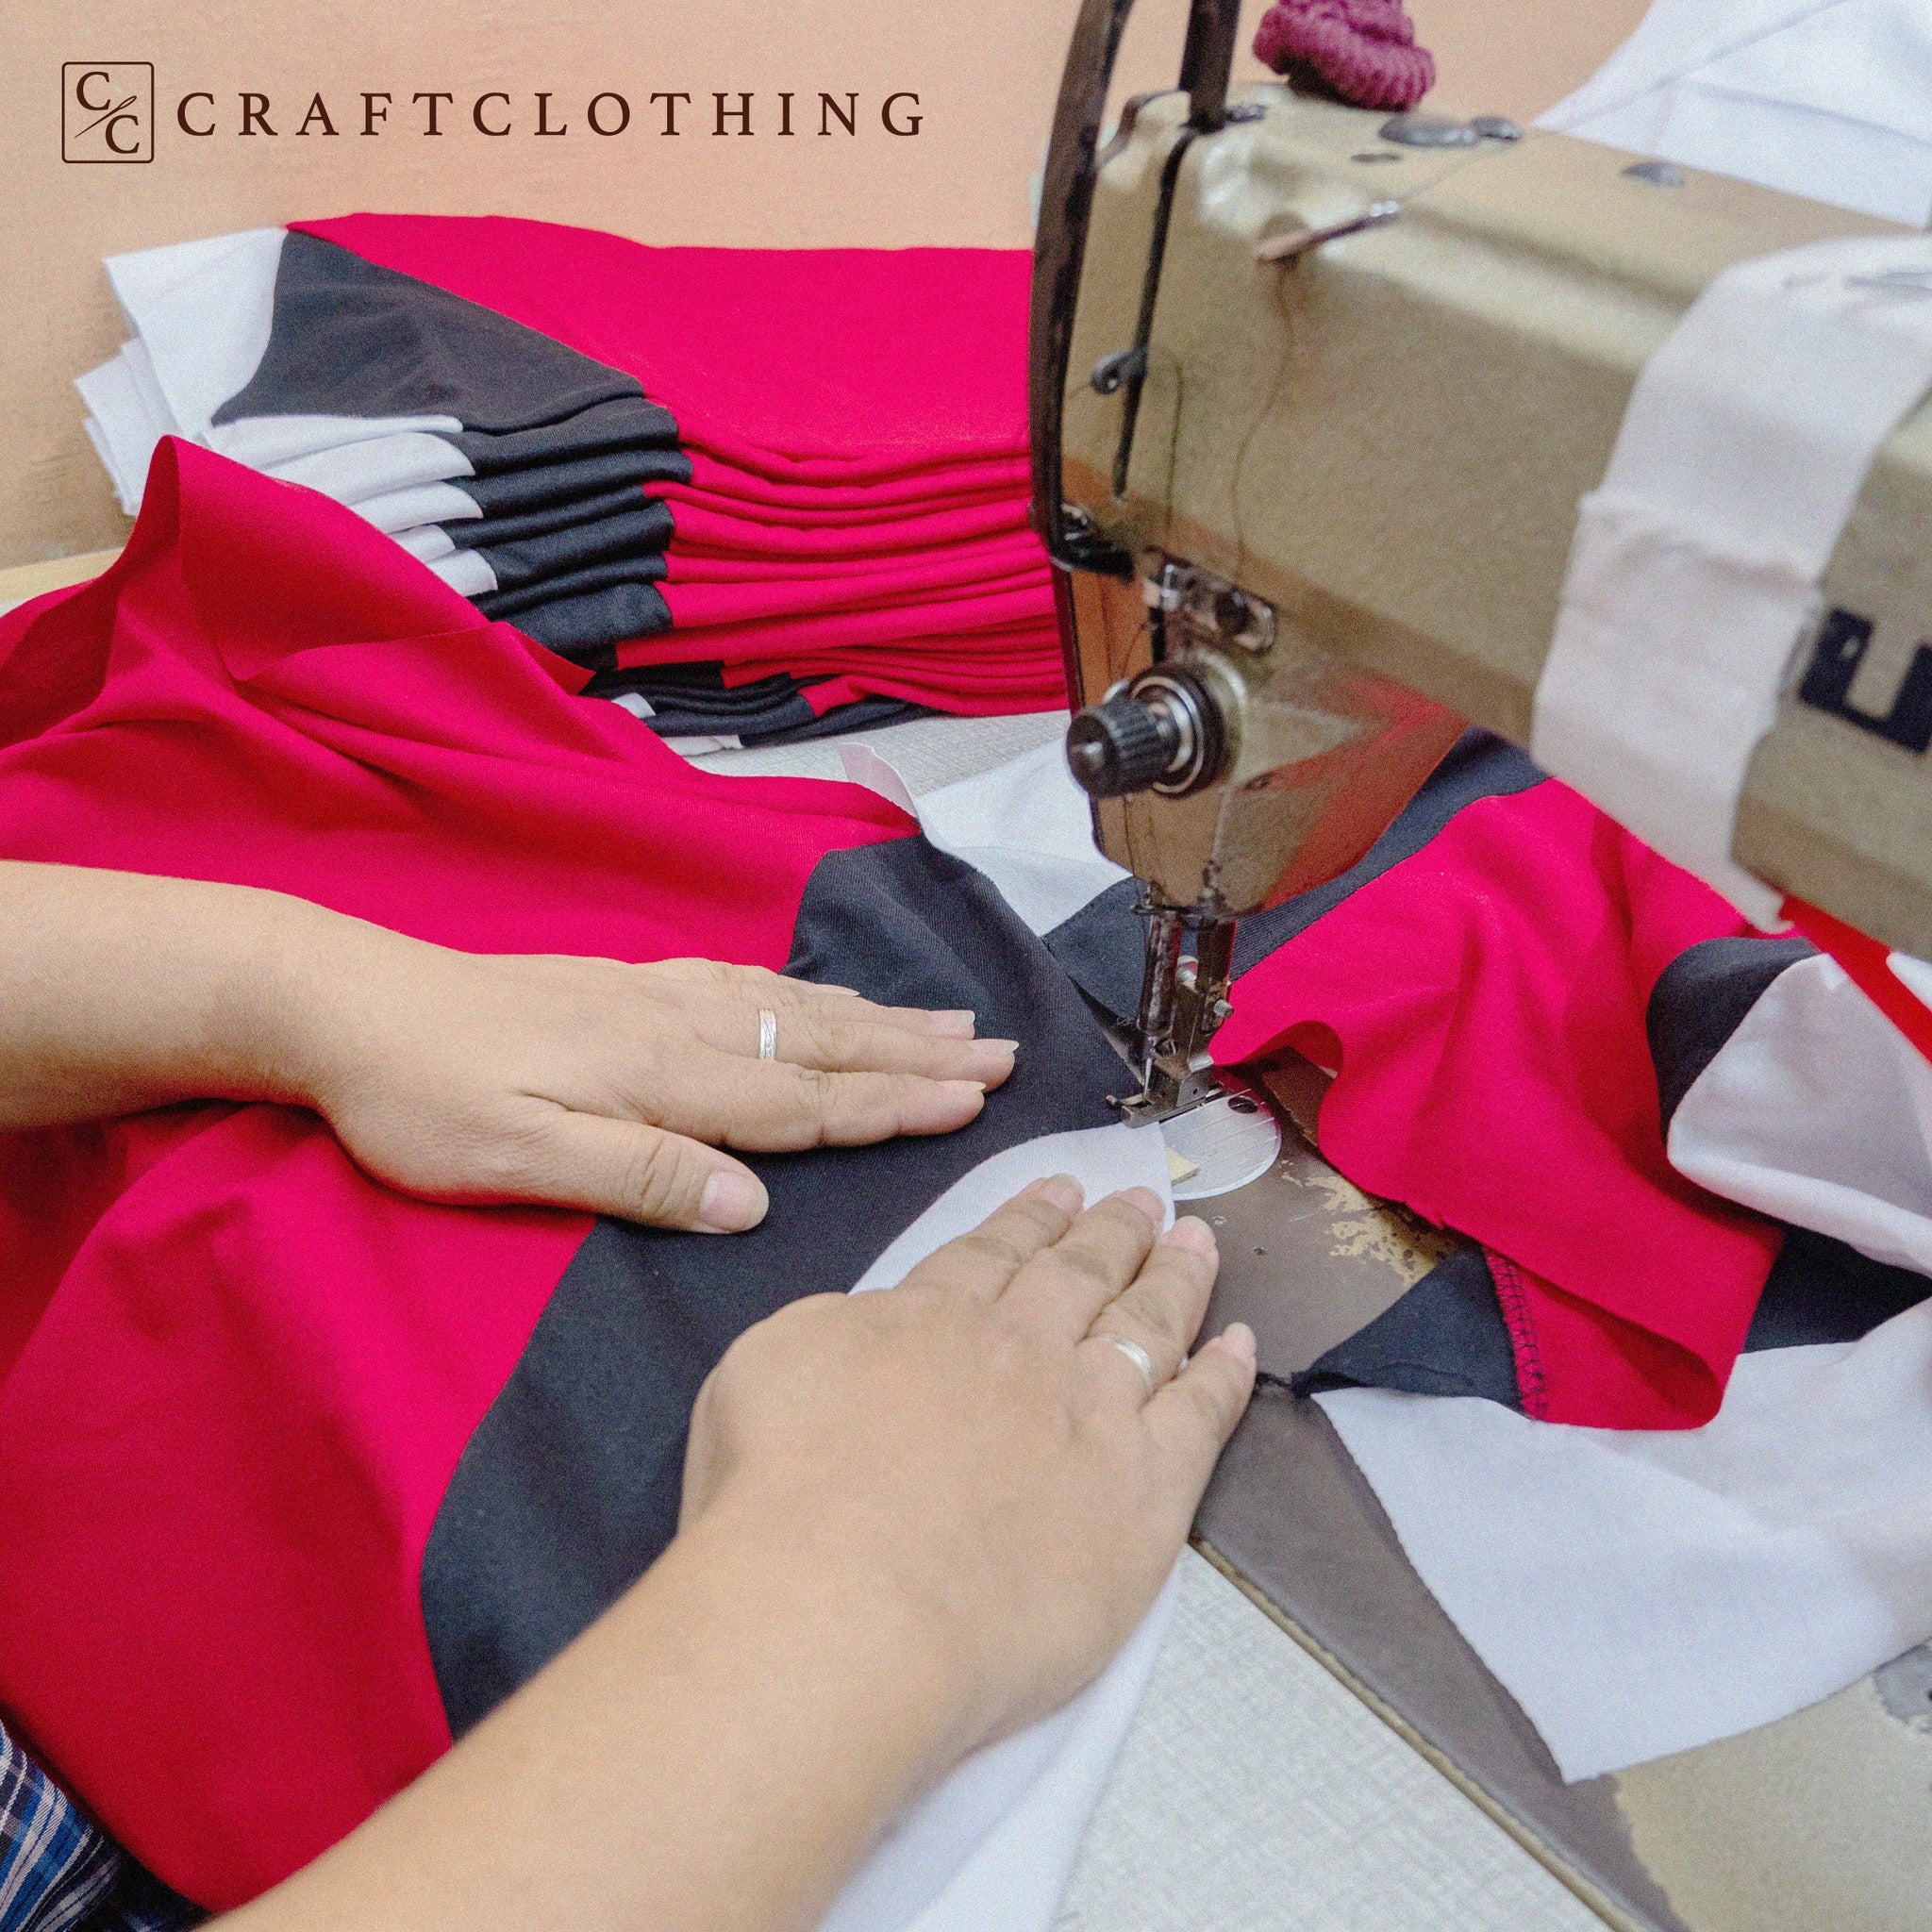 Here’s a behind the scenes shot of how Craft Clothing creates our top-quality pieces.